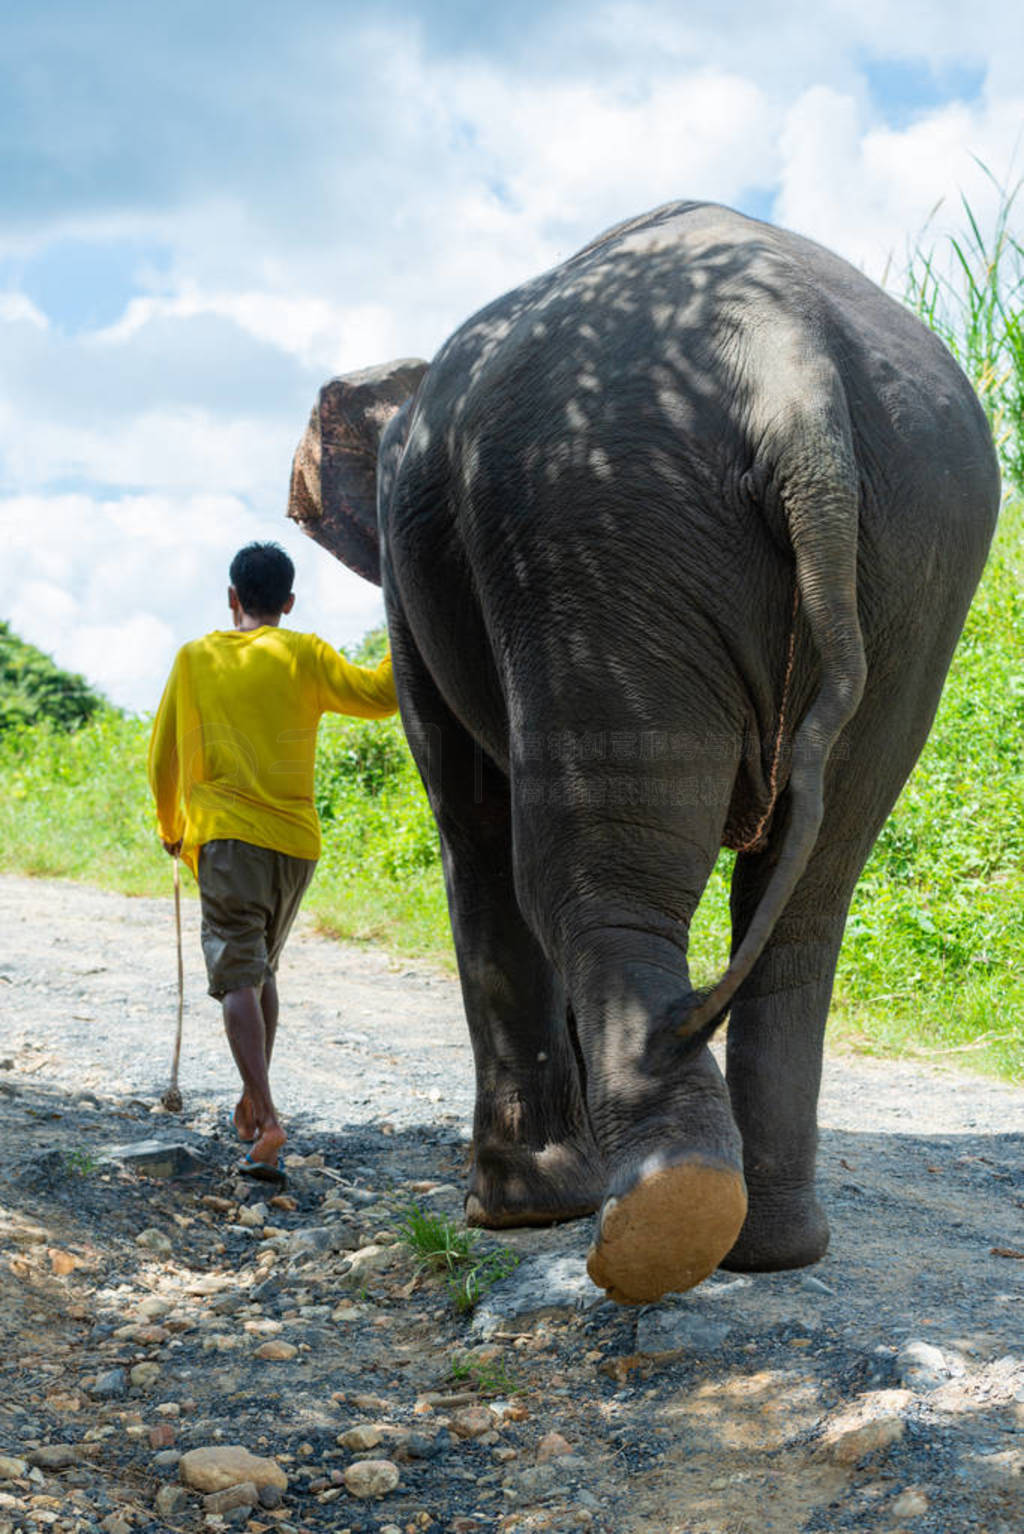 Elephant walking away with a man